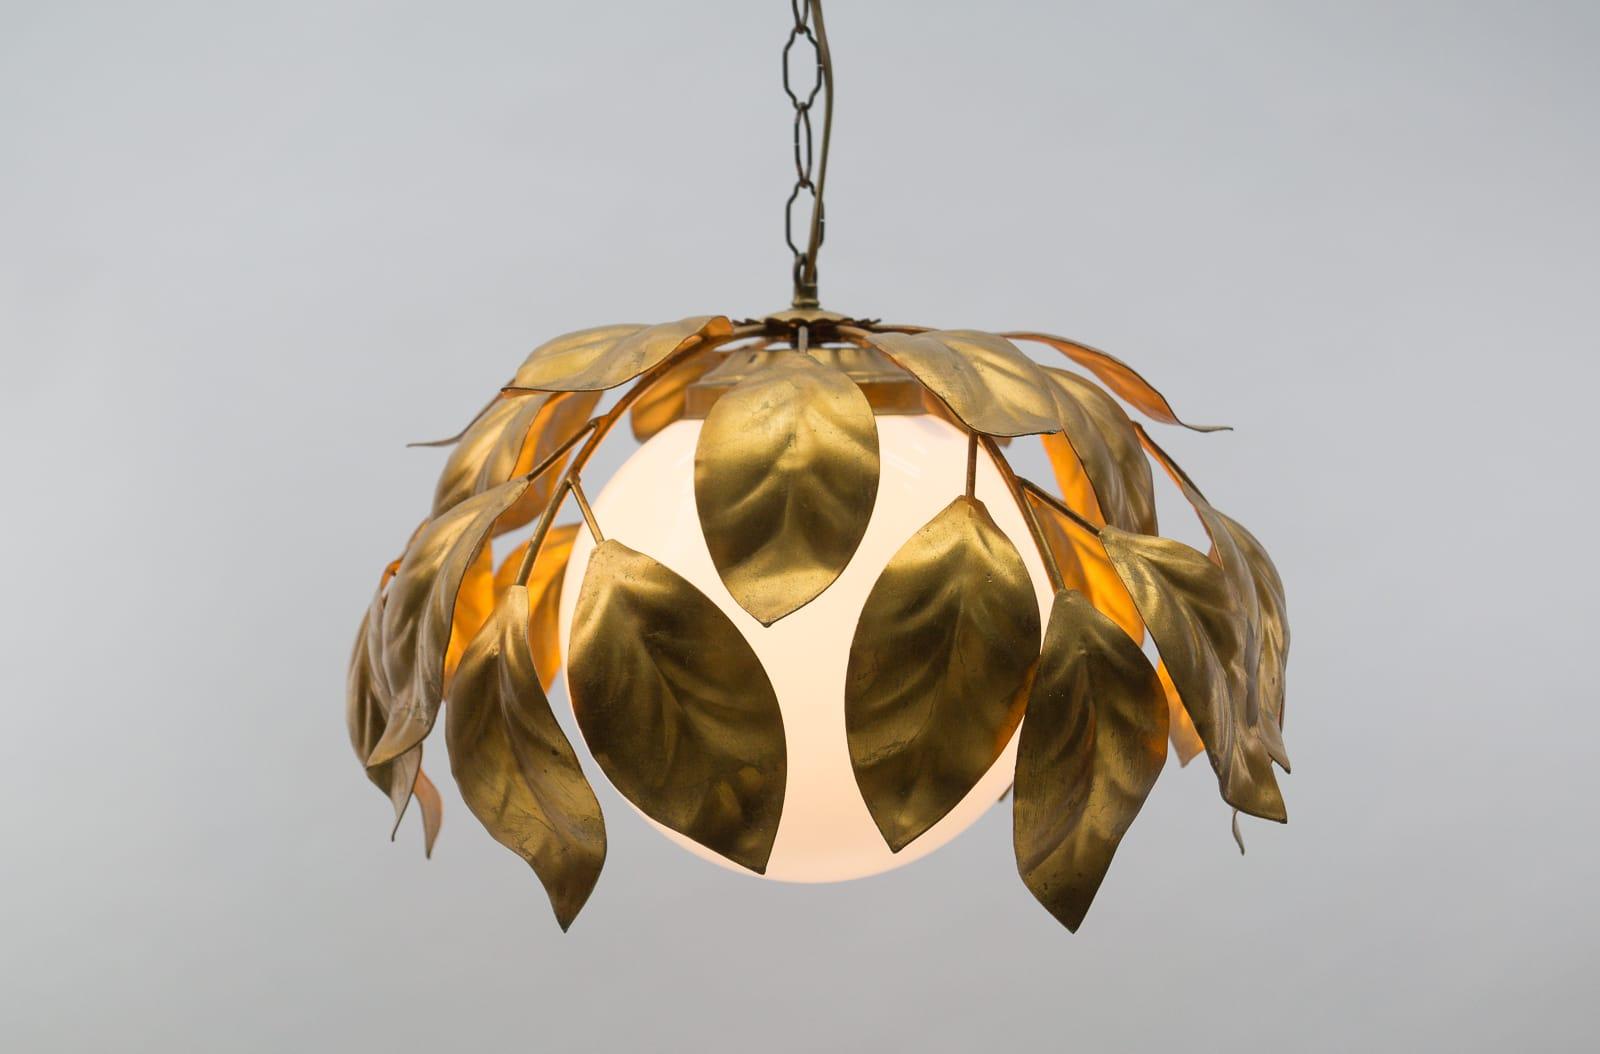 Italian Nice Gilded Florentine Ceiling Lamp with Opaline Glass Globe Shade, Italy, 1960s For Sale